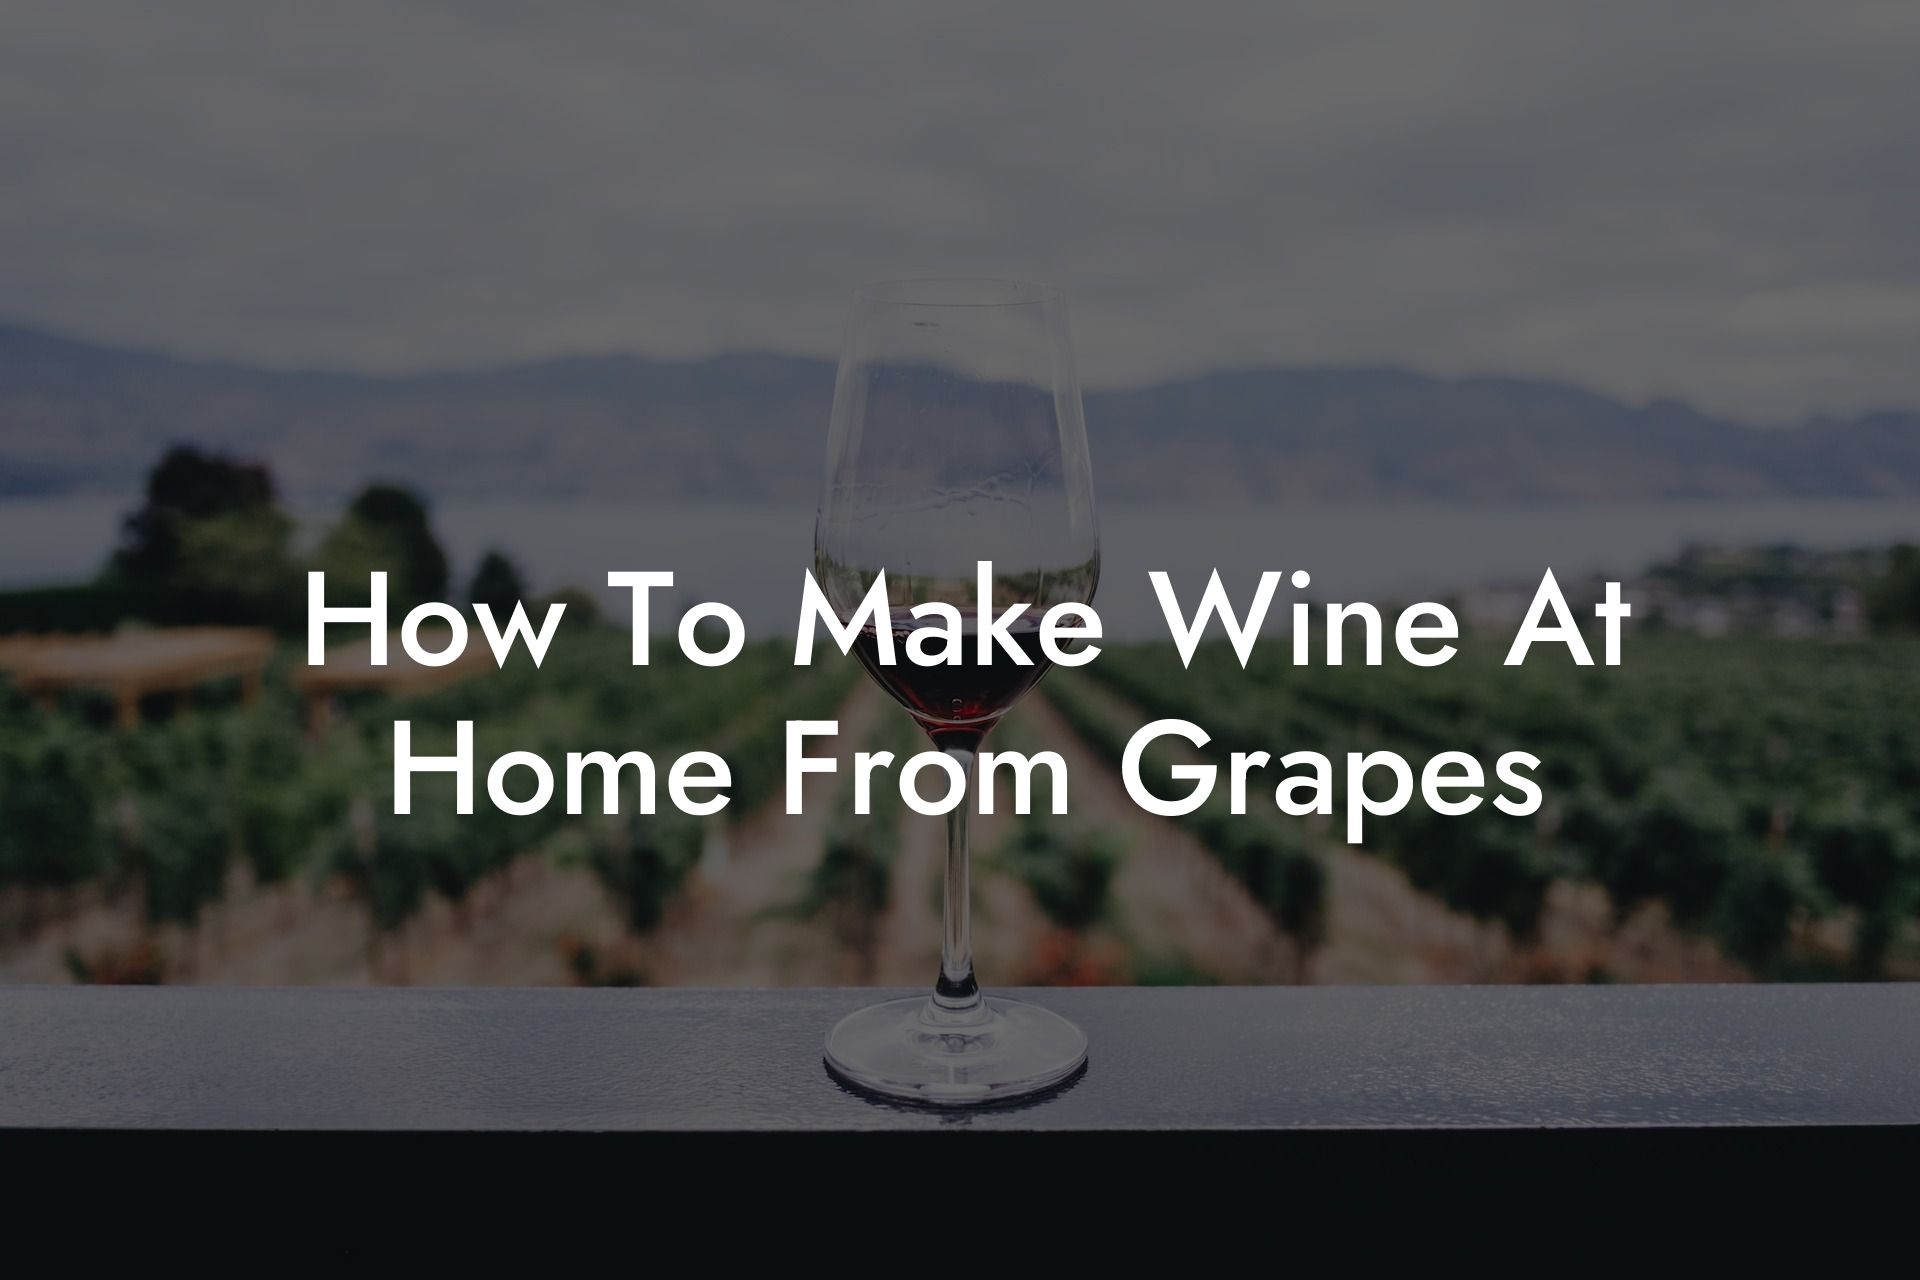 How To Make Wine At Home From Grapes